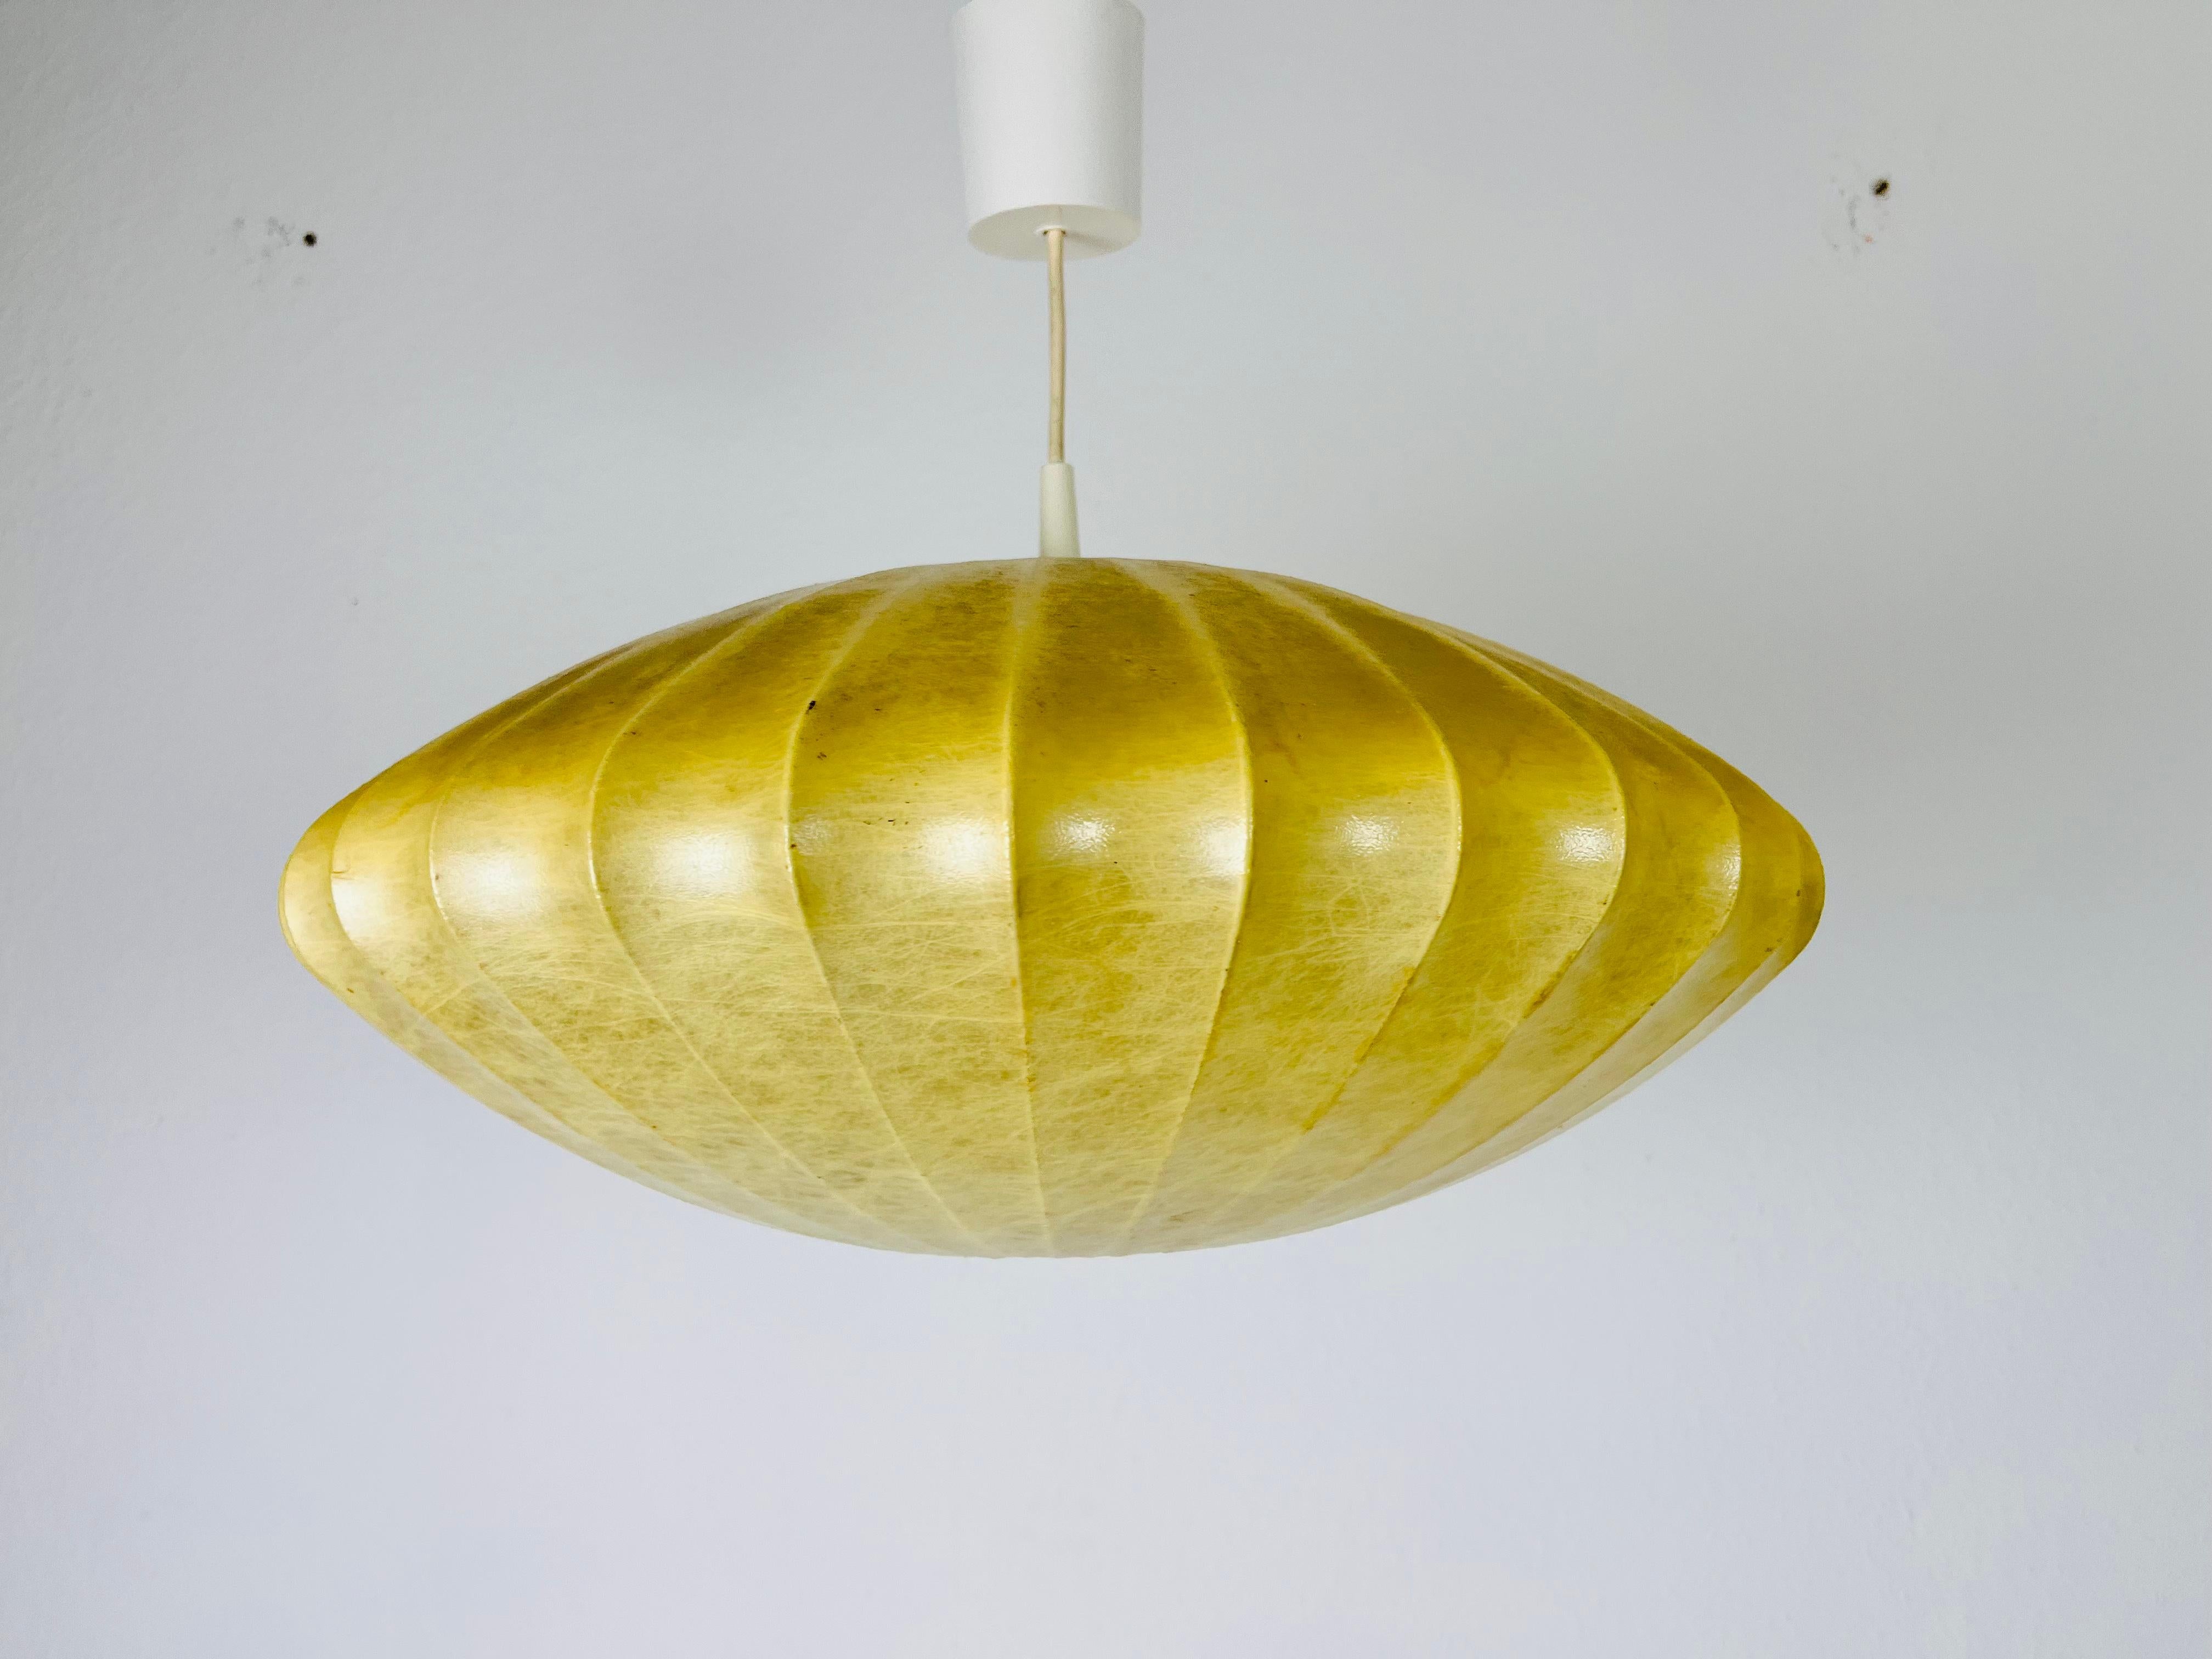 A cocoon hanging lamp made In the 1960s. The material of the lamp is resin.

Dimensions::
height: 22 cm - 40 cm

The light requires one E27 light bulb. Works with both 120/220V. Good vintage condition.

 
Free worldwide express shipping.